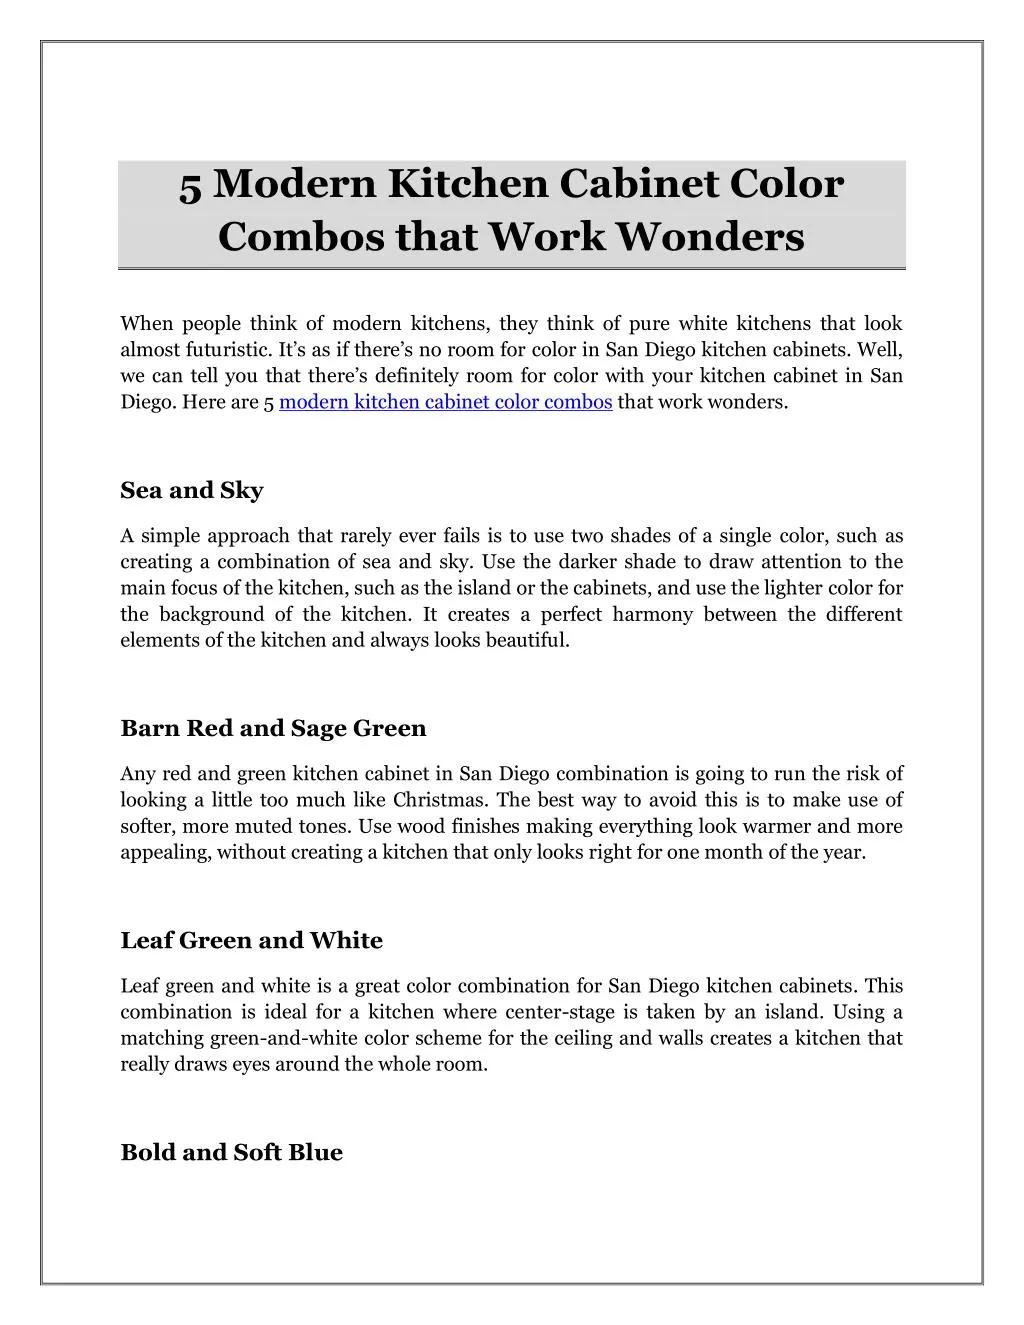 5 modern kitchen cabinet color combos that work